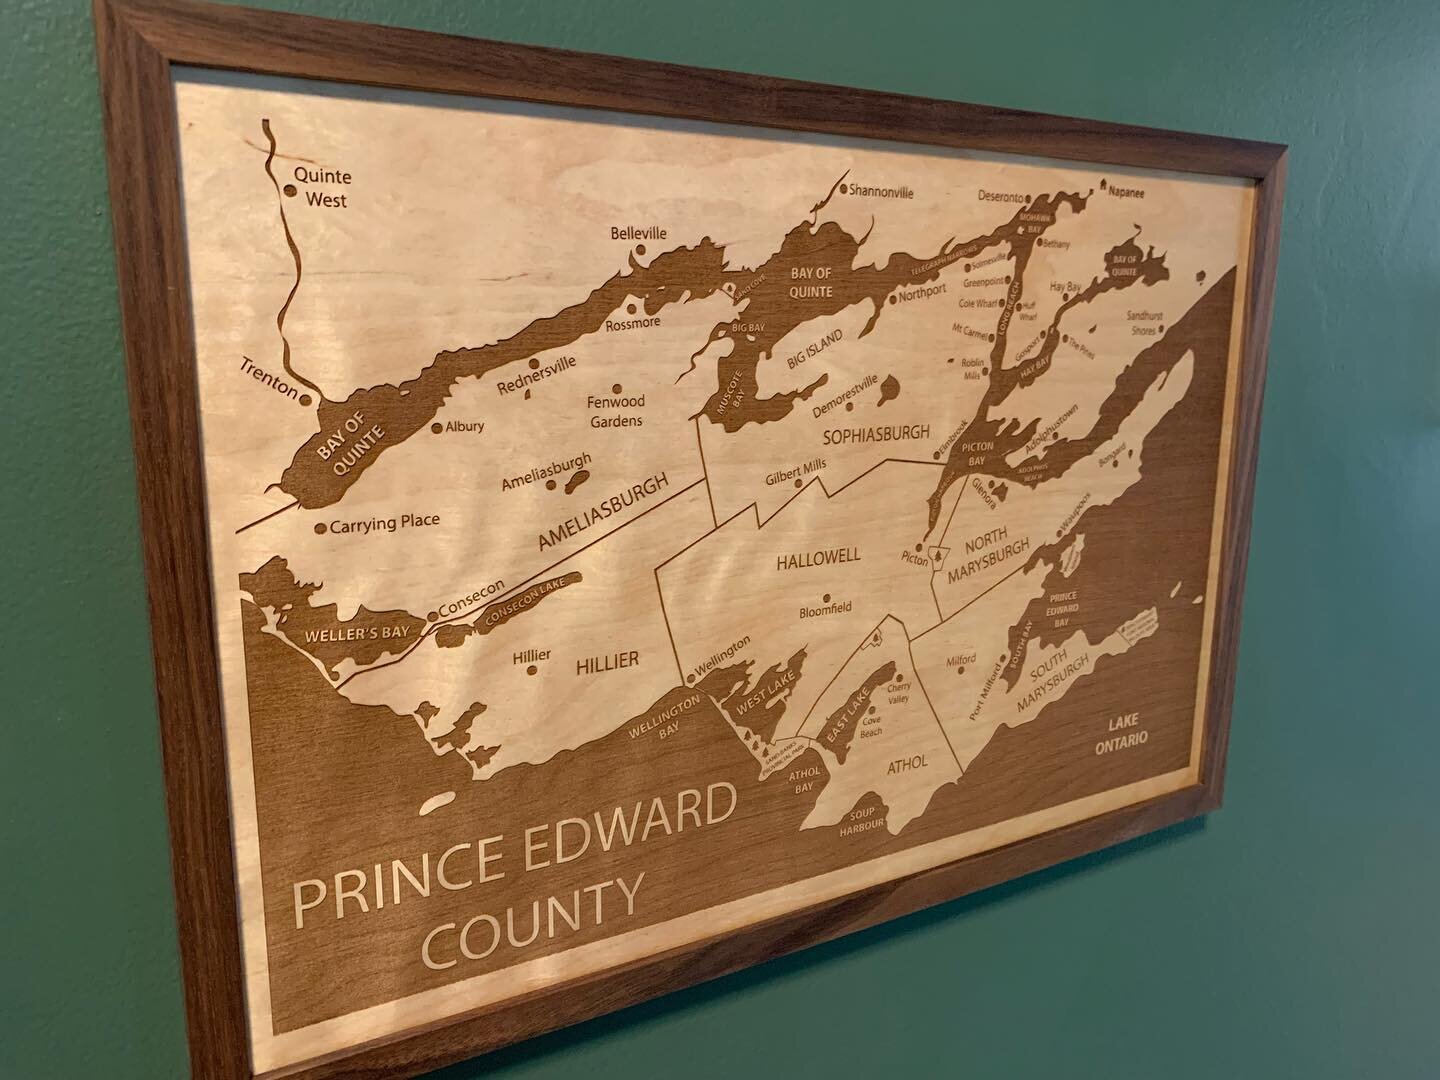 Added this beautifully done piece from @etchedatlas to our #airbnb entrance wall  https://abnb.me/FTszYcymCtb  Can you find us on the map? #travel #customart #visitpec #houseandhome #napaneeontario #bayofquinte #rto9